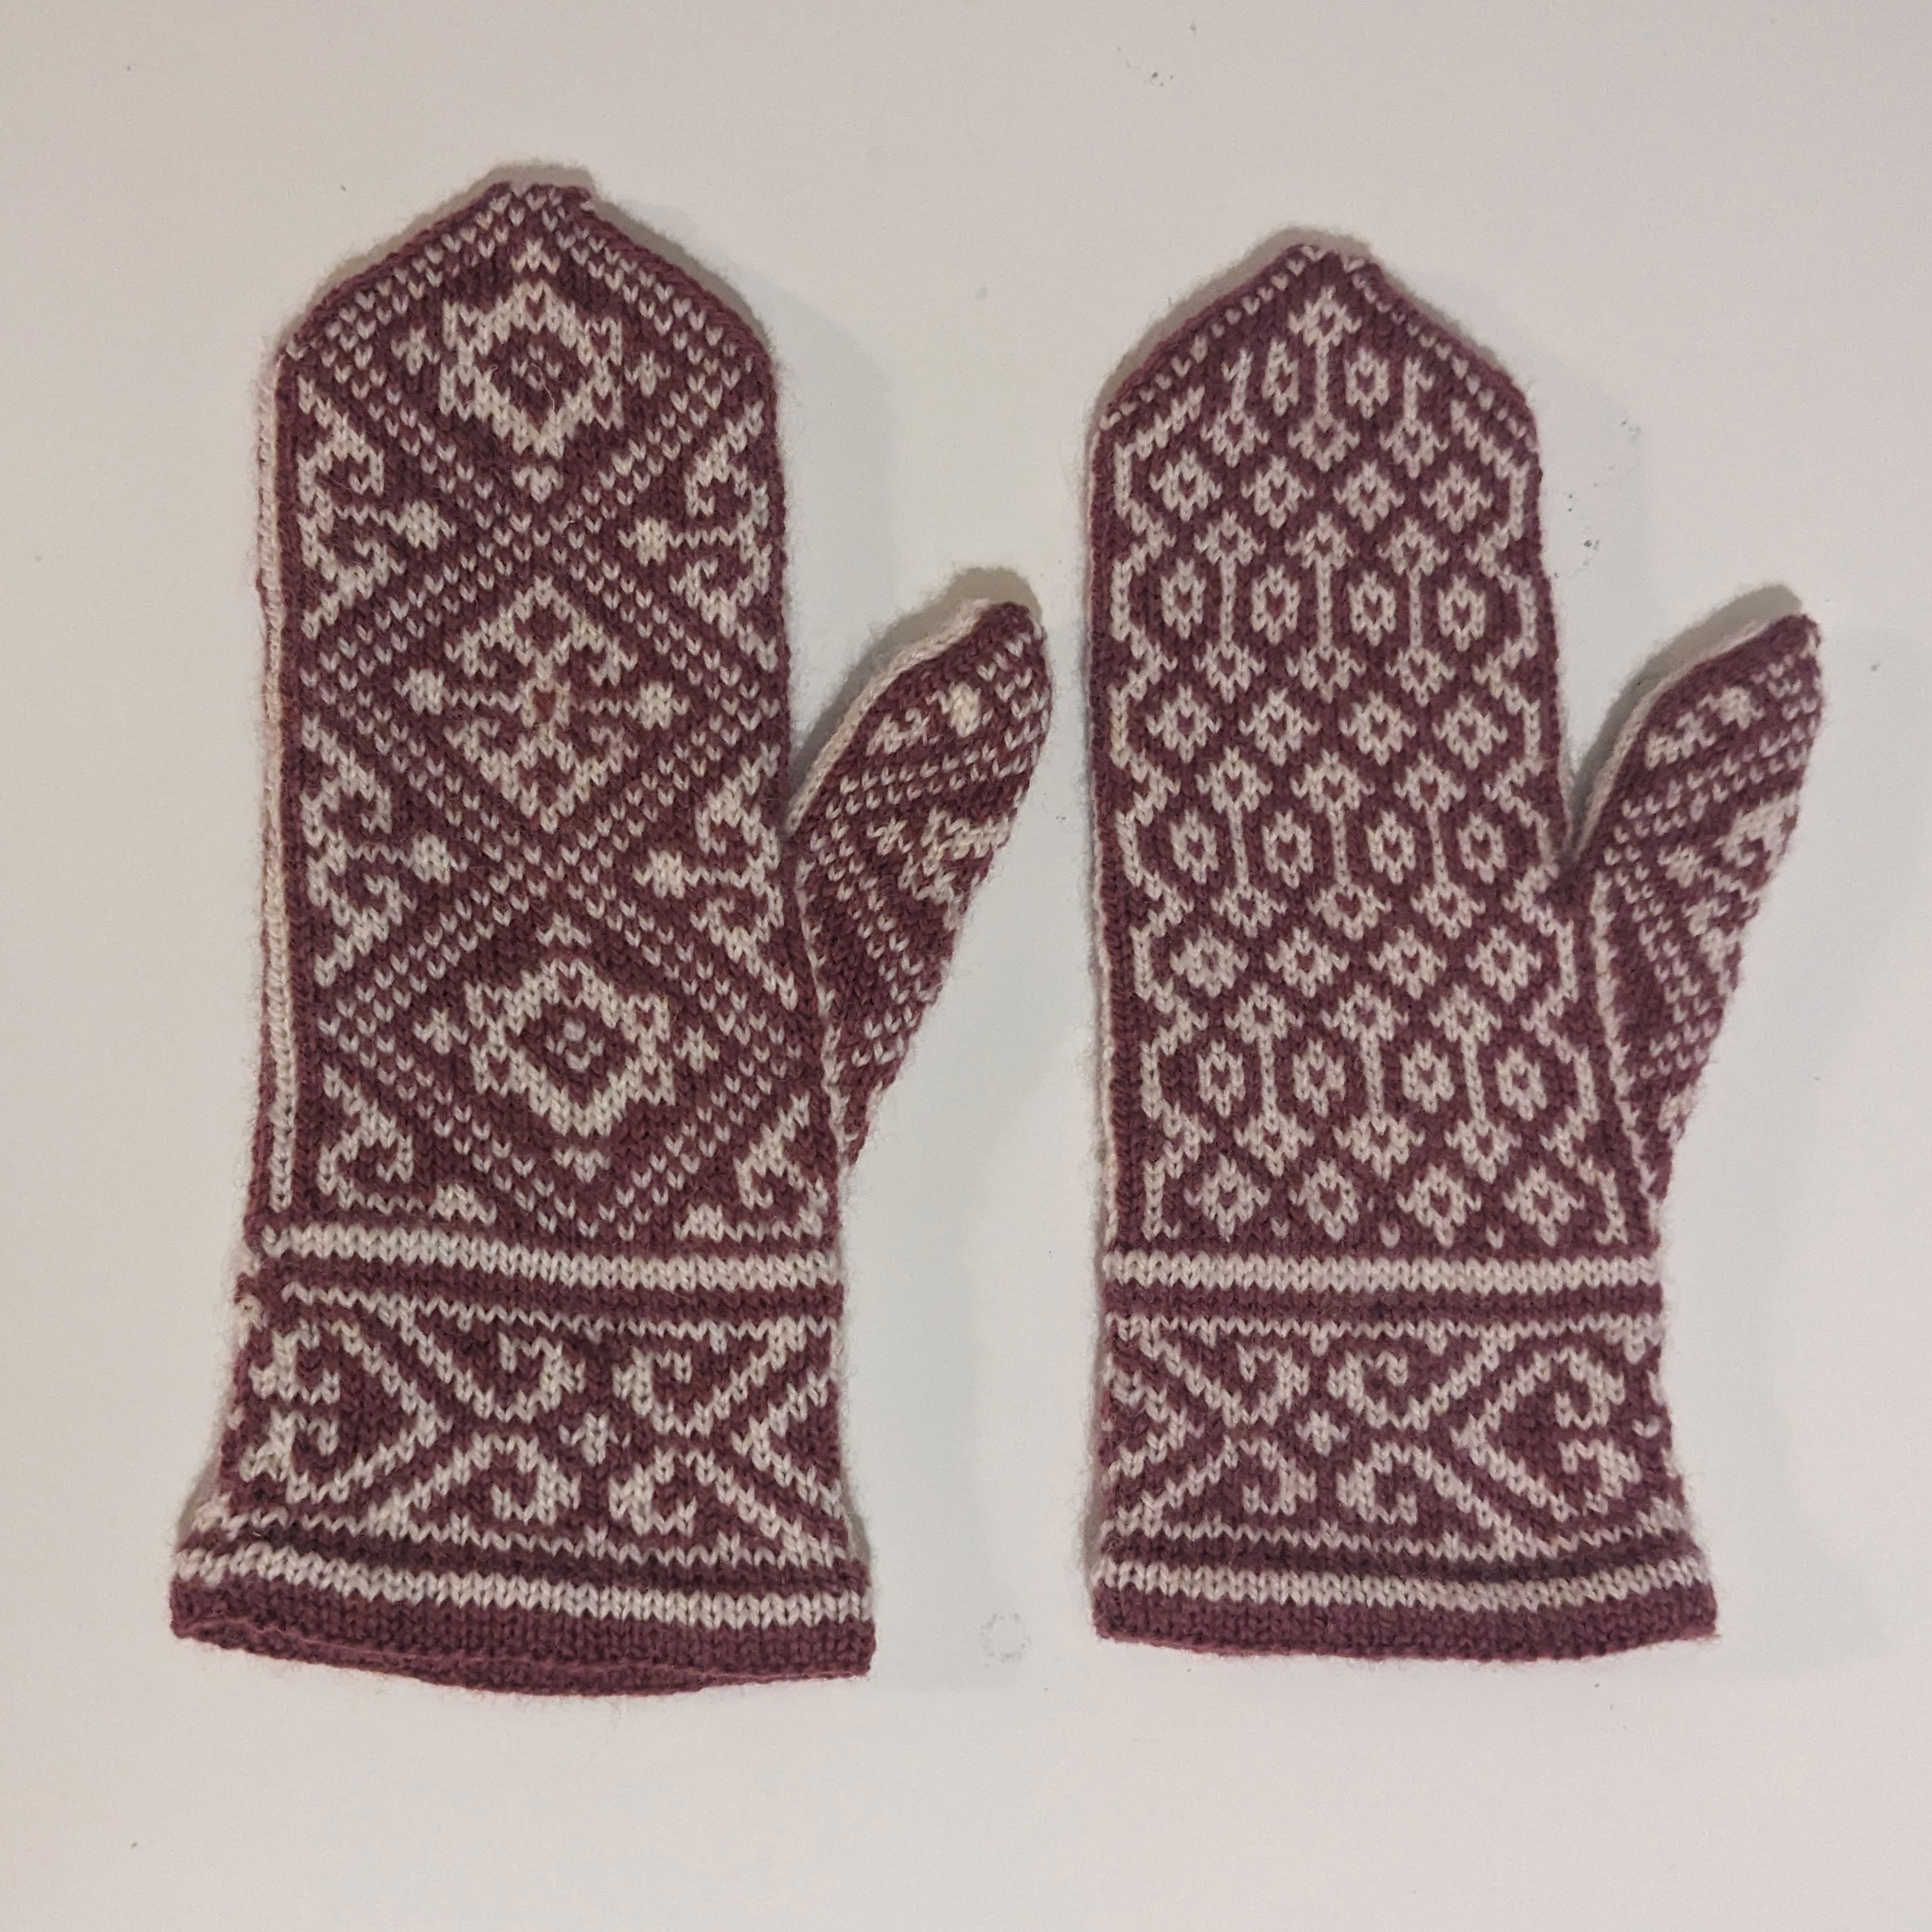 Purple and white patterned handknit mittens